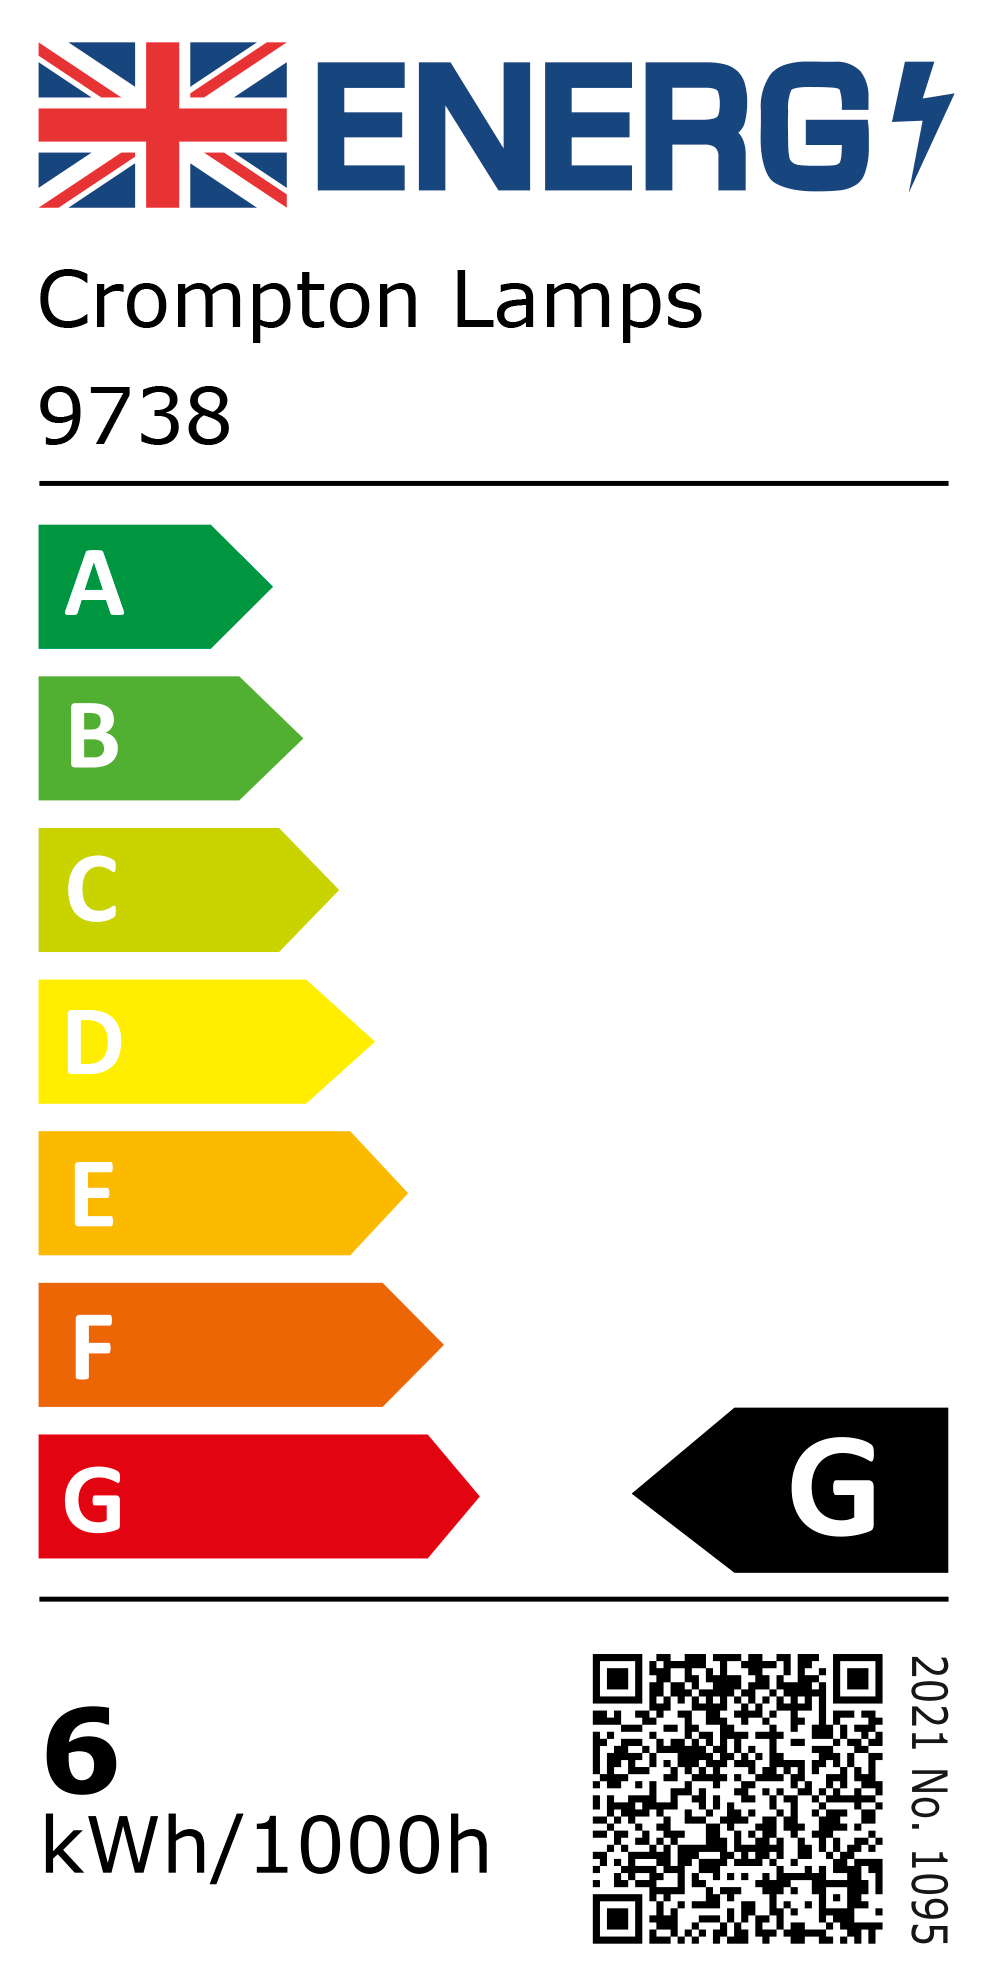 New 2021 Energy Rating Label: Stock Code 9738